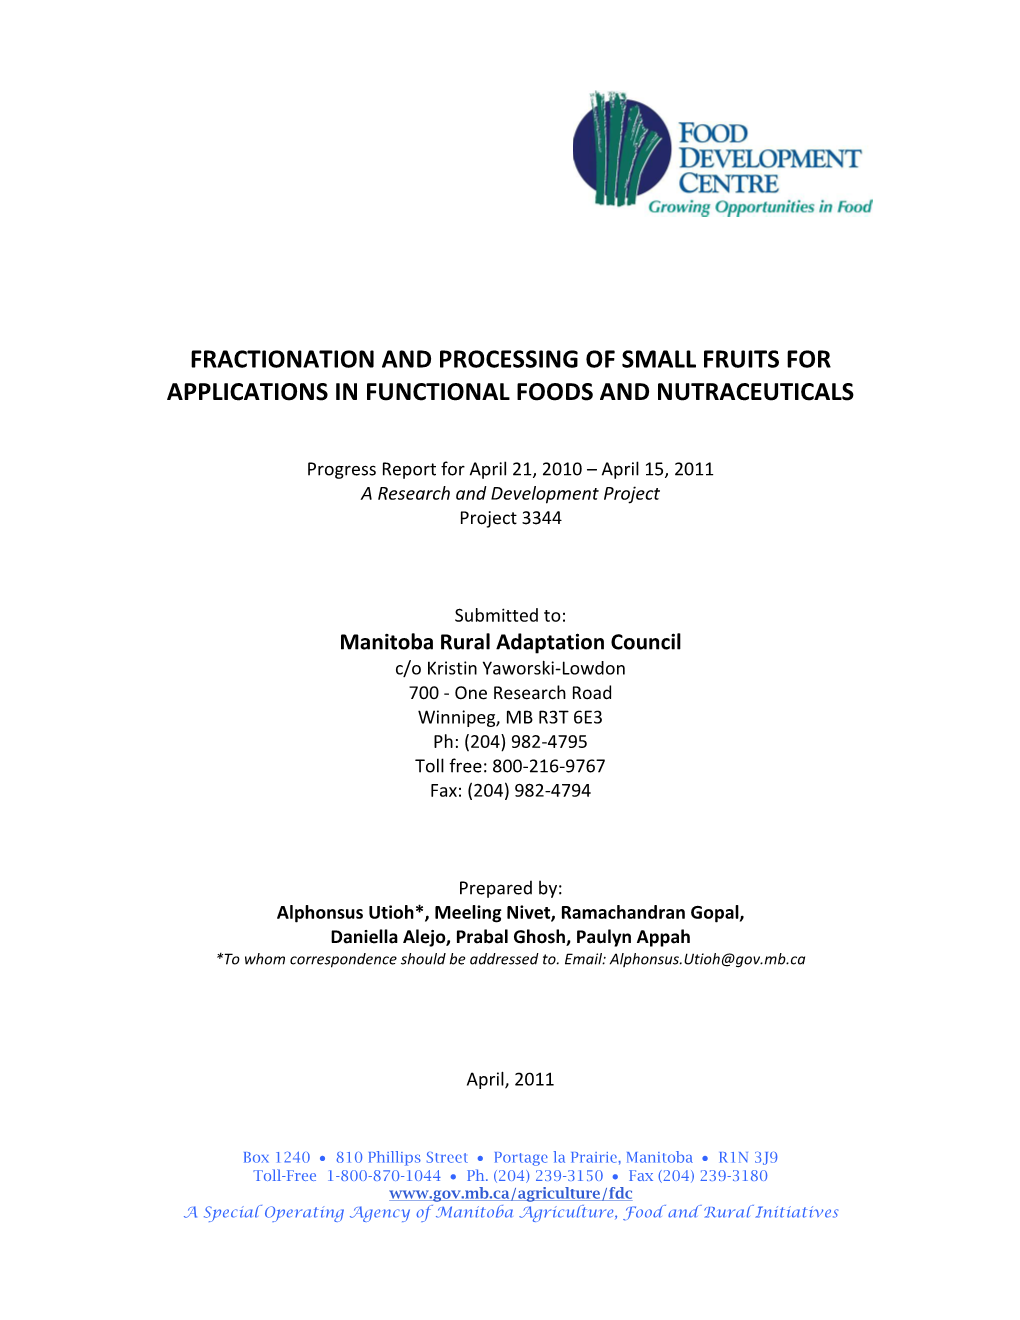 Fractionation and Processing of Small Fruits for Applications in Functional Foods and Nutraceuticals